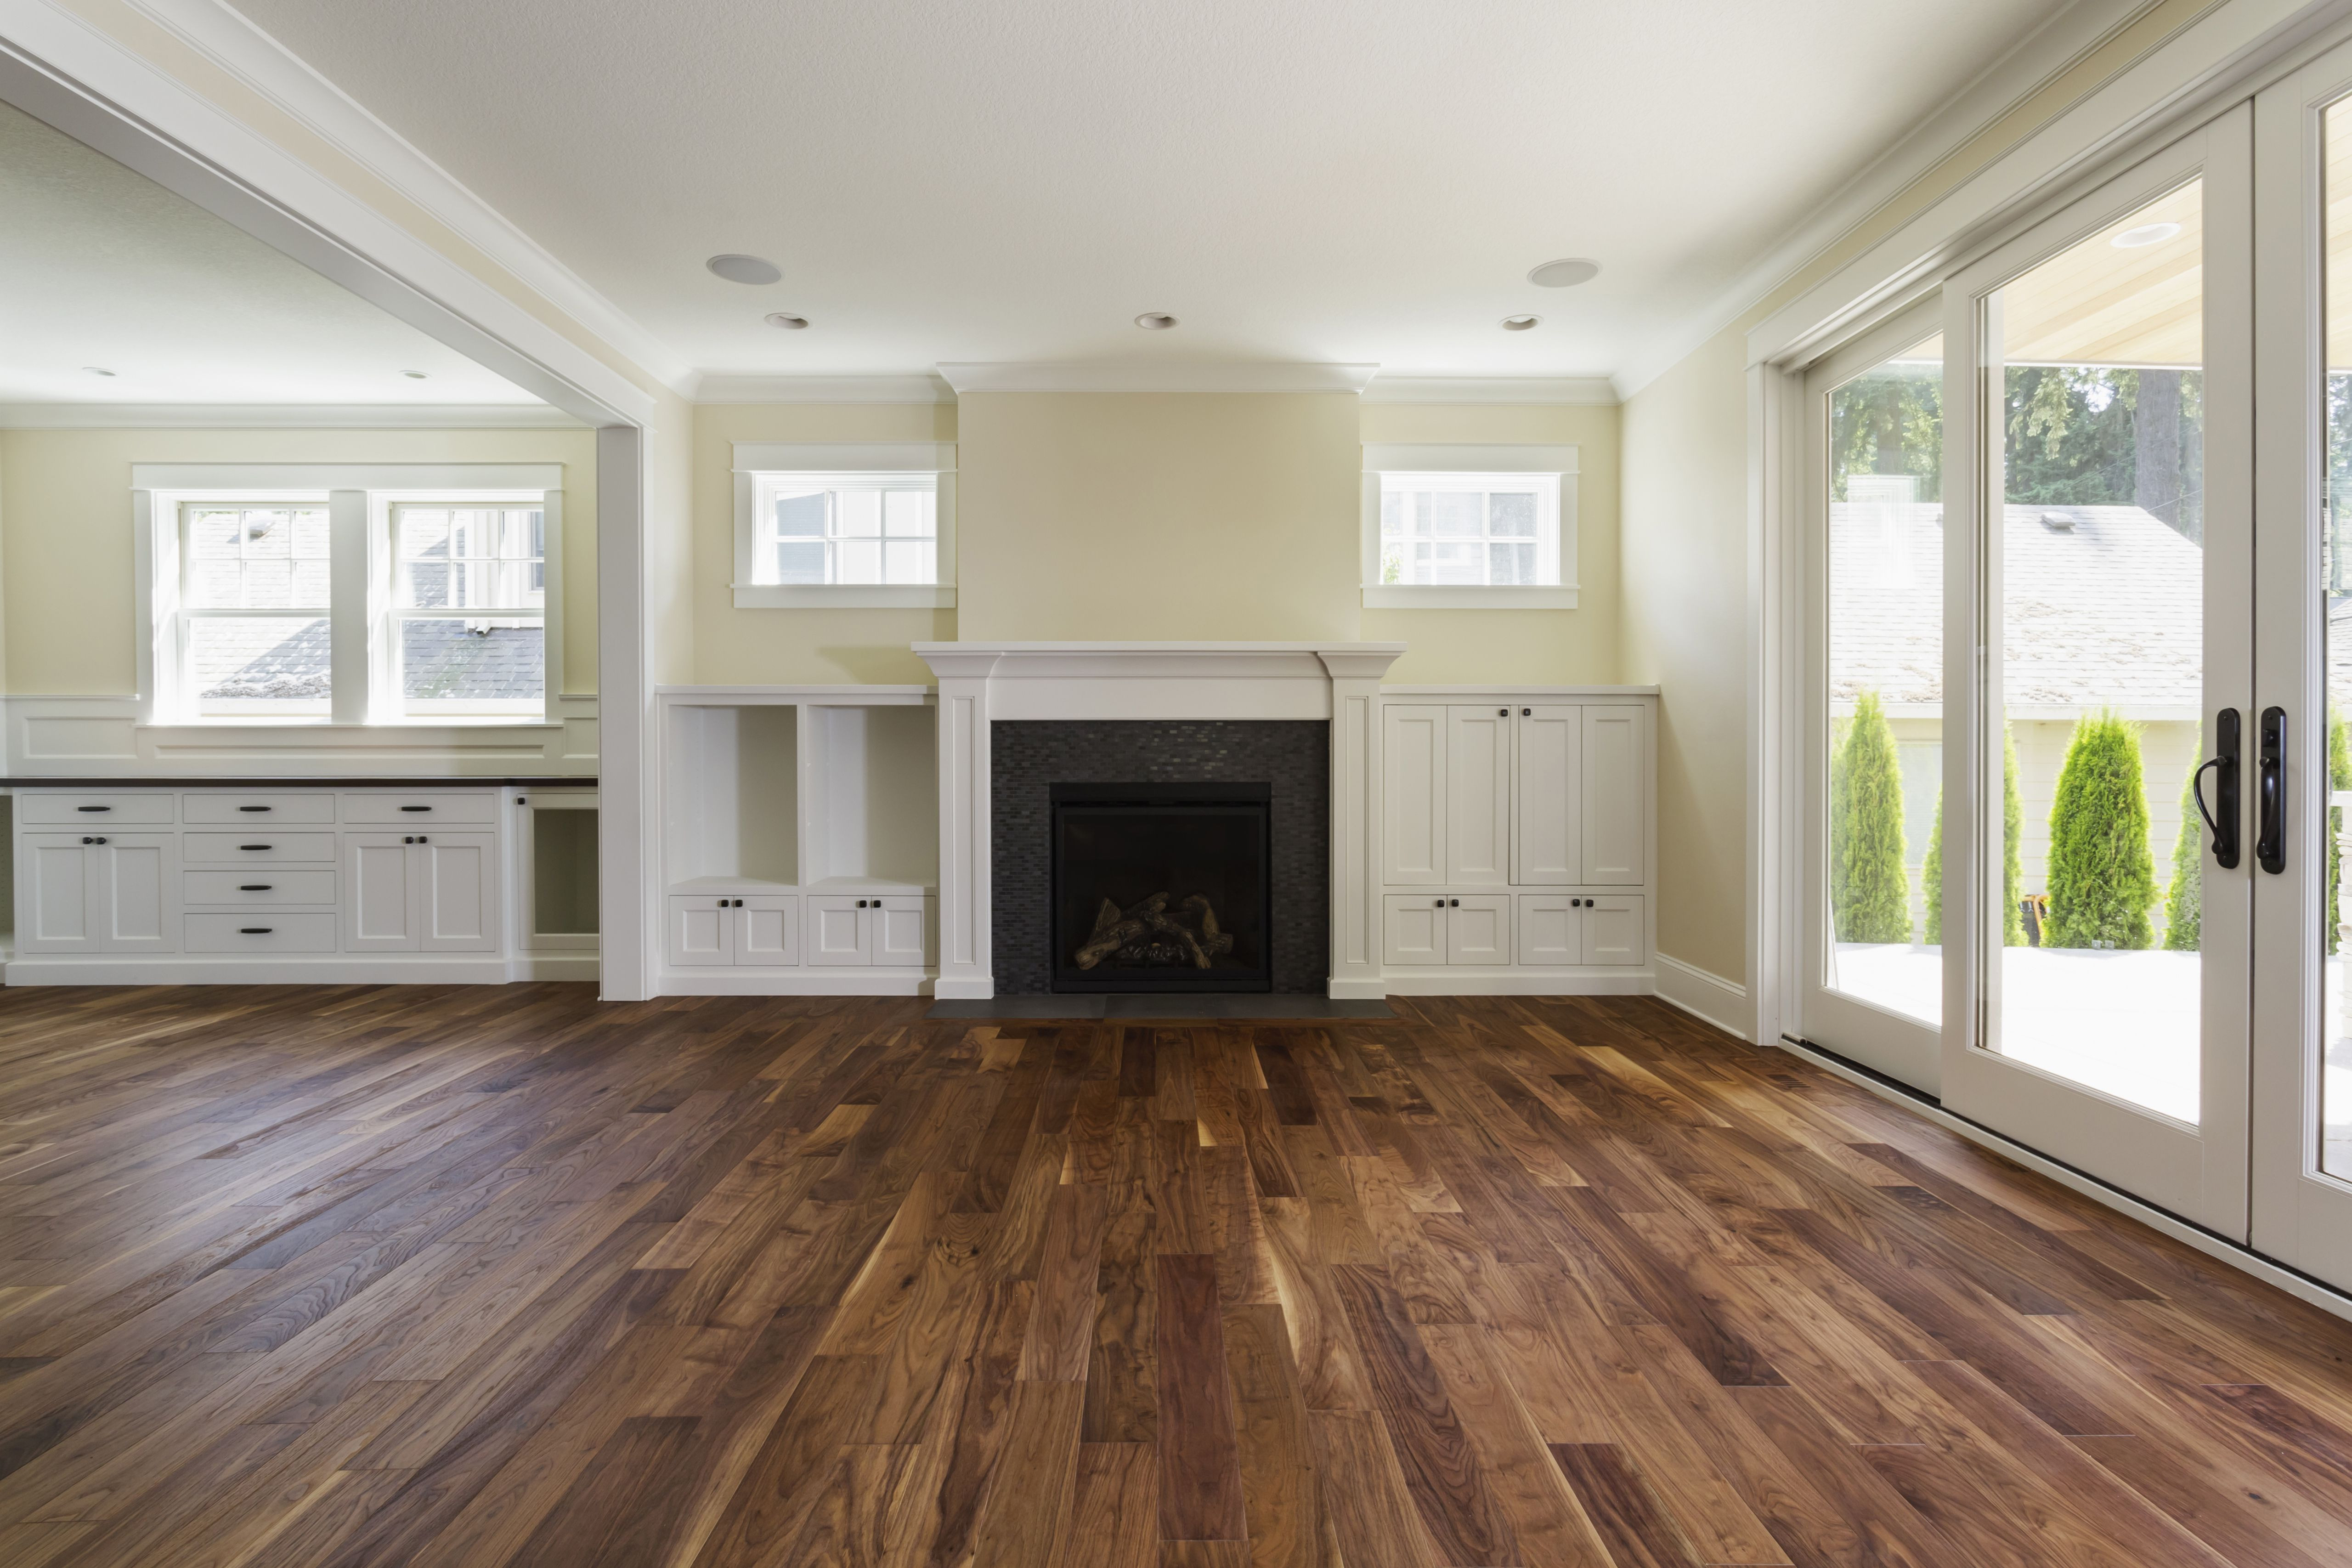 20 Elegant How Much Does It Cost to Refinish Hardwood Floors Canada 2024 free download how much does it cost to refinish hardwood floors canada of the pros and cons of prefinished hardwood flooring in fireplace and built in shelves in living room 482143011 57bef8e33df78cc16e03